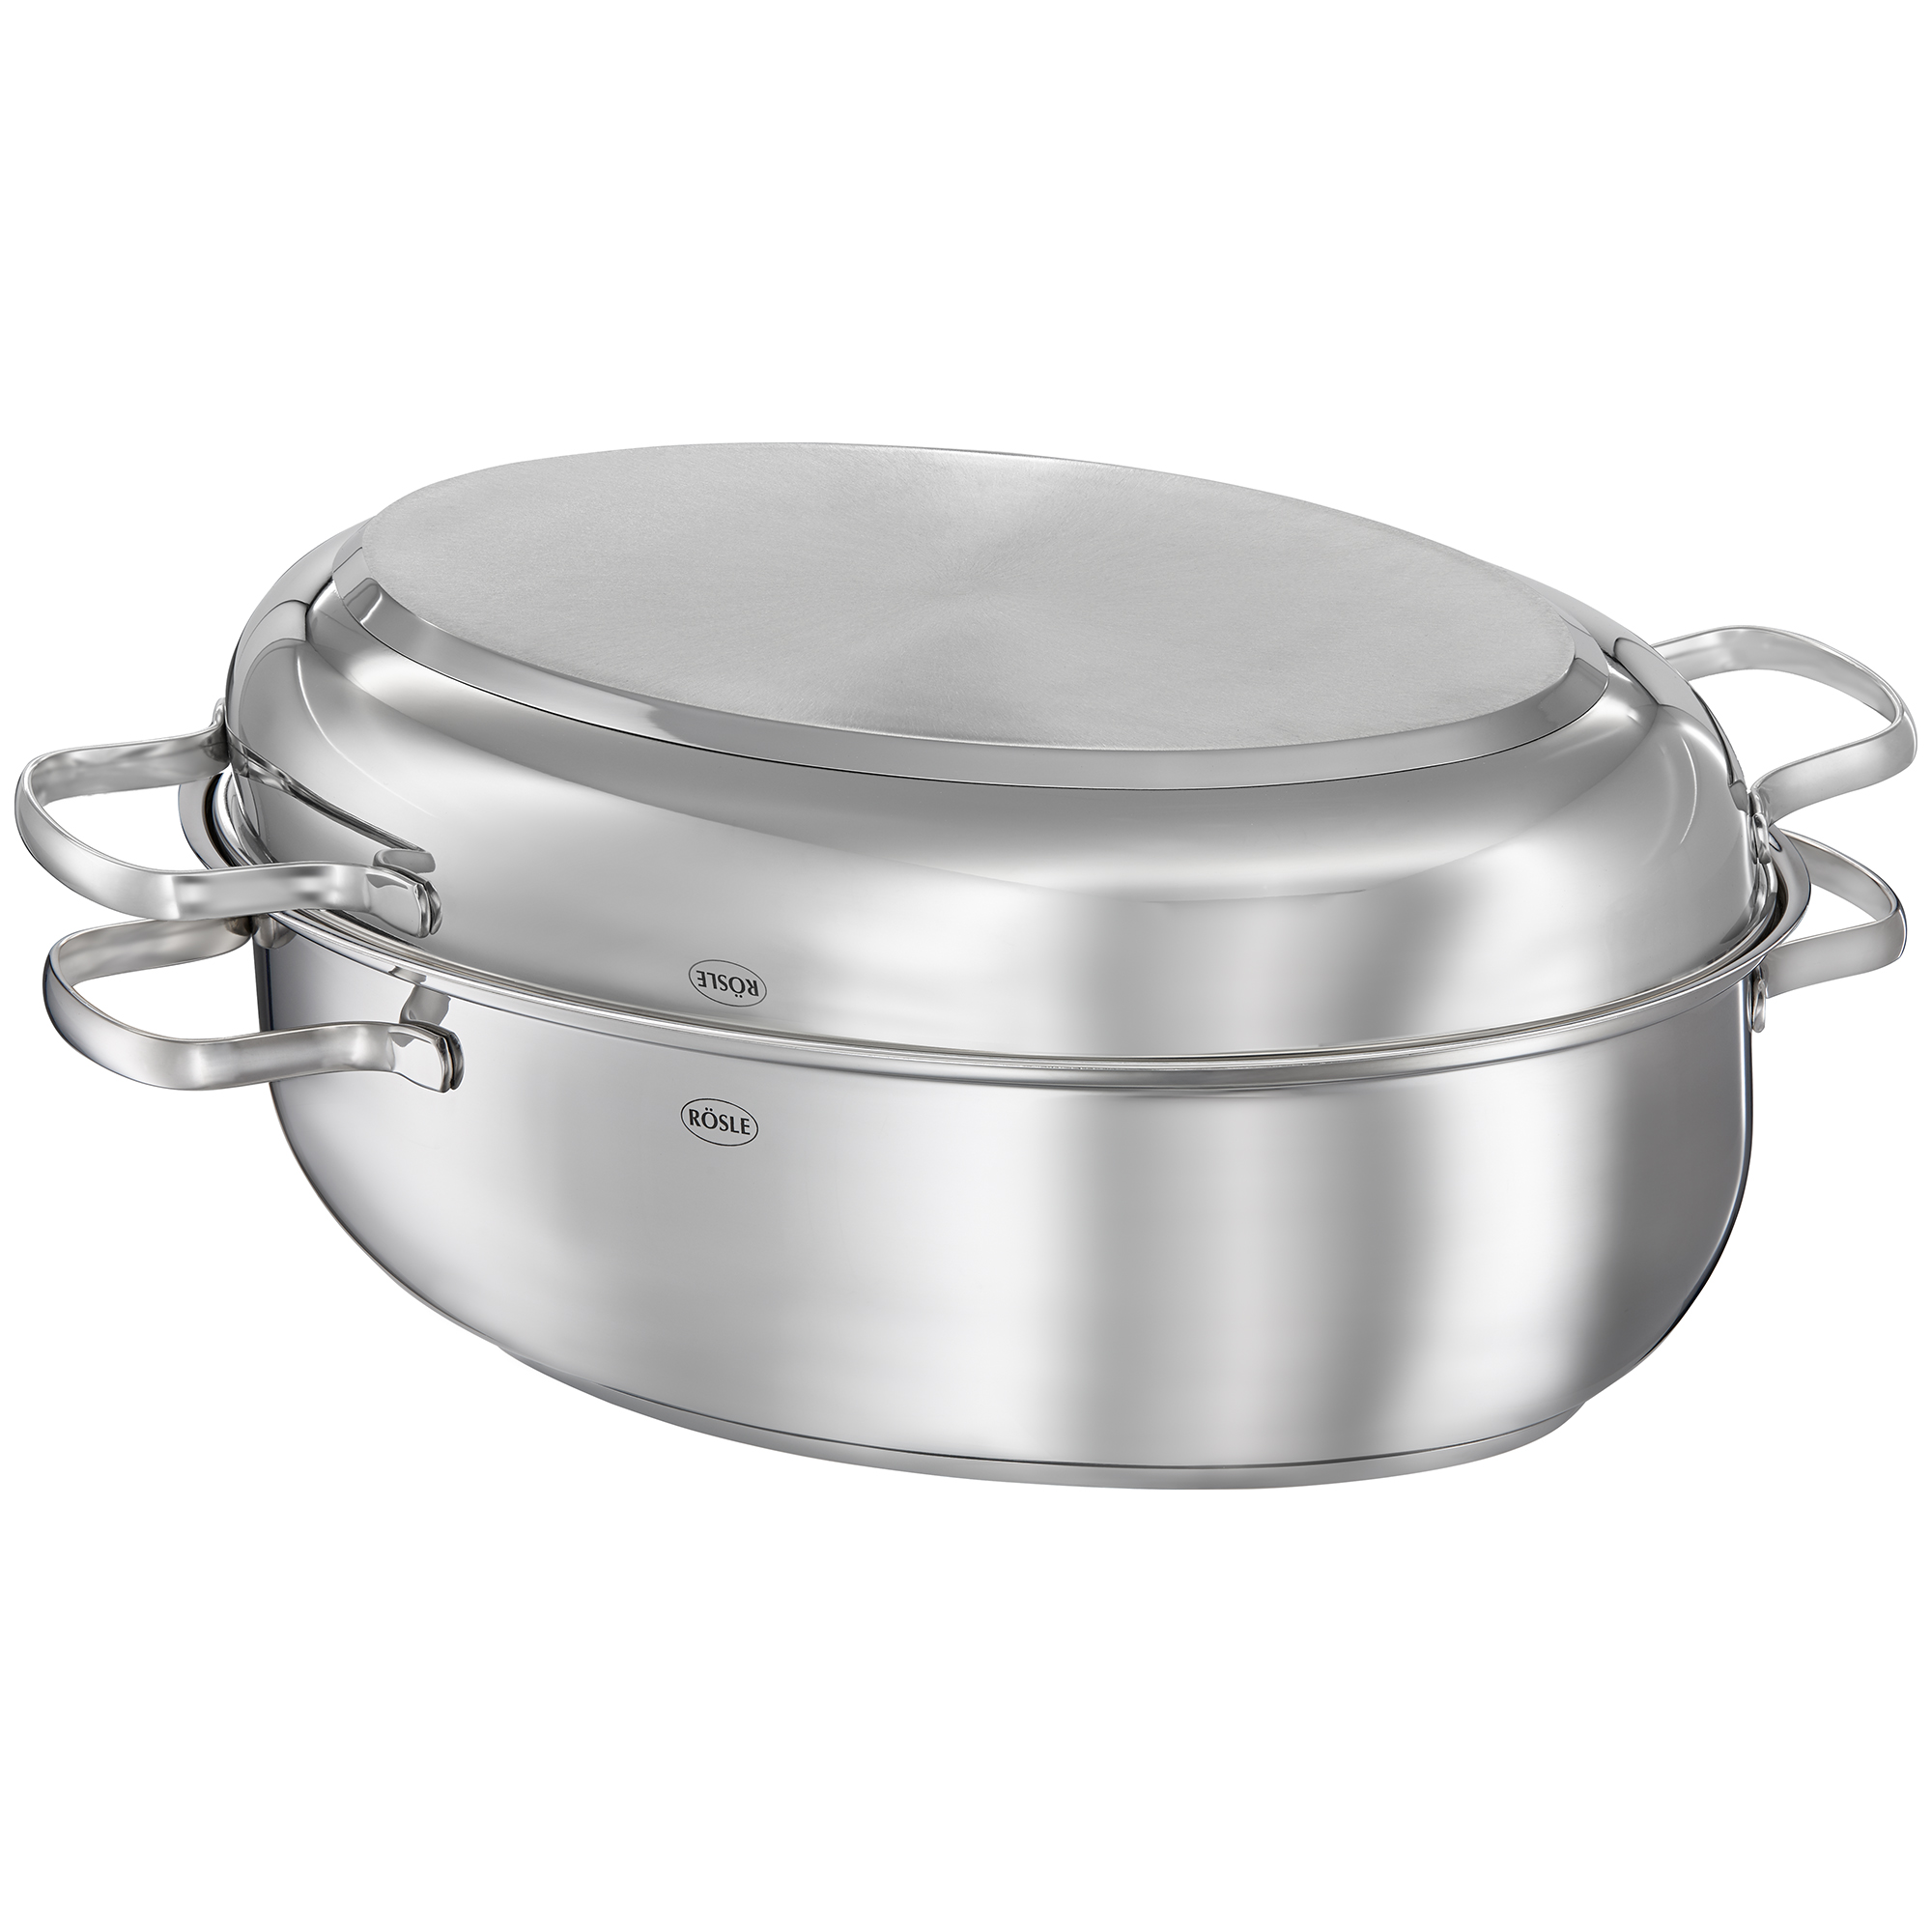 Oval Roaster Elegance with lid/fish pan with non-stick coating